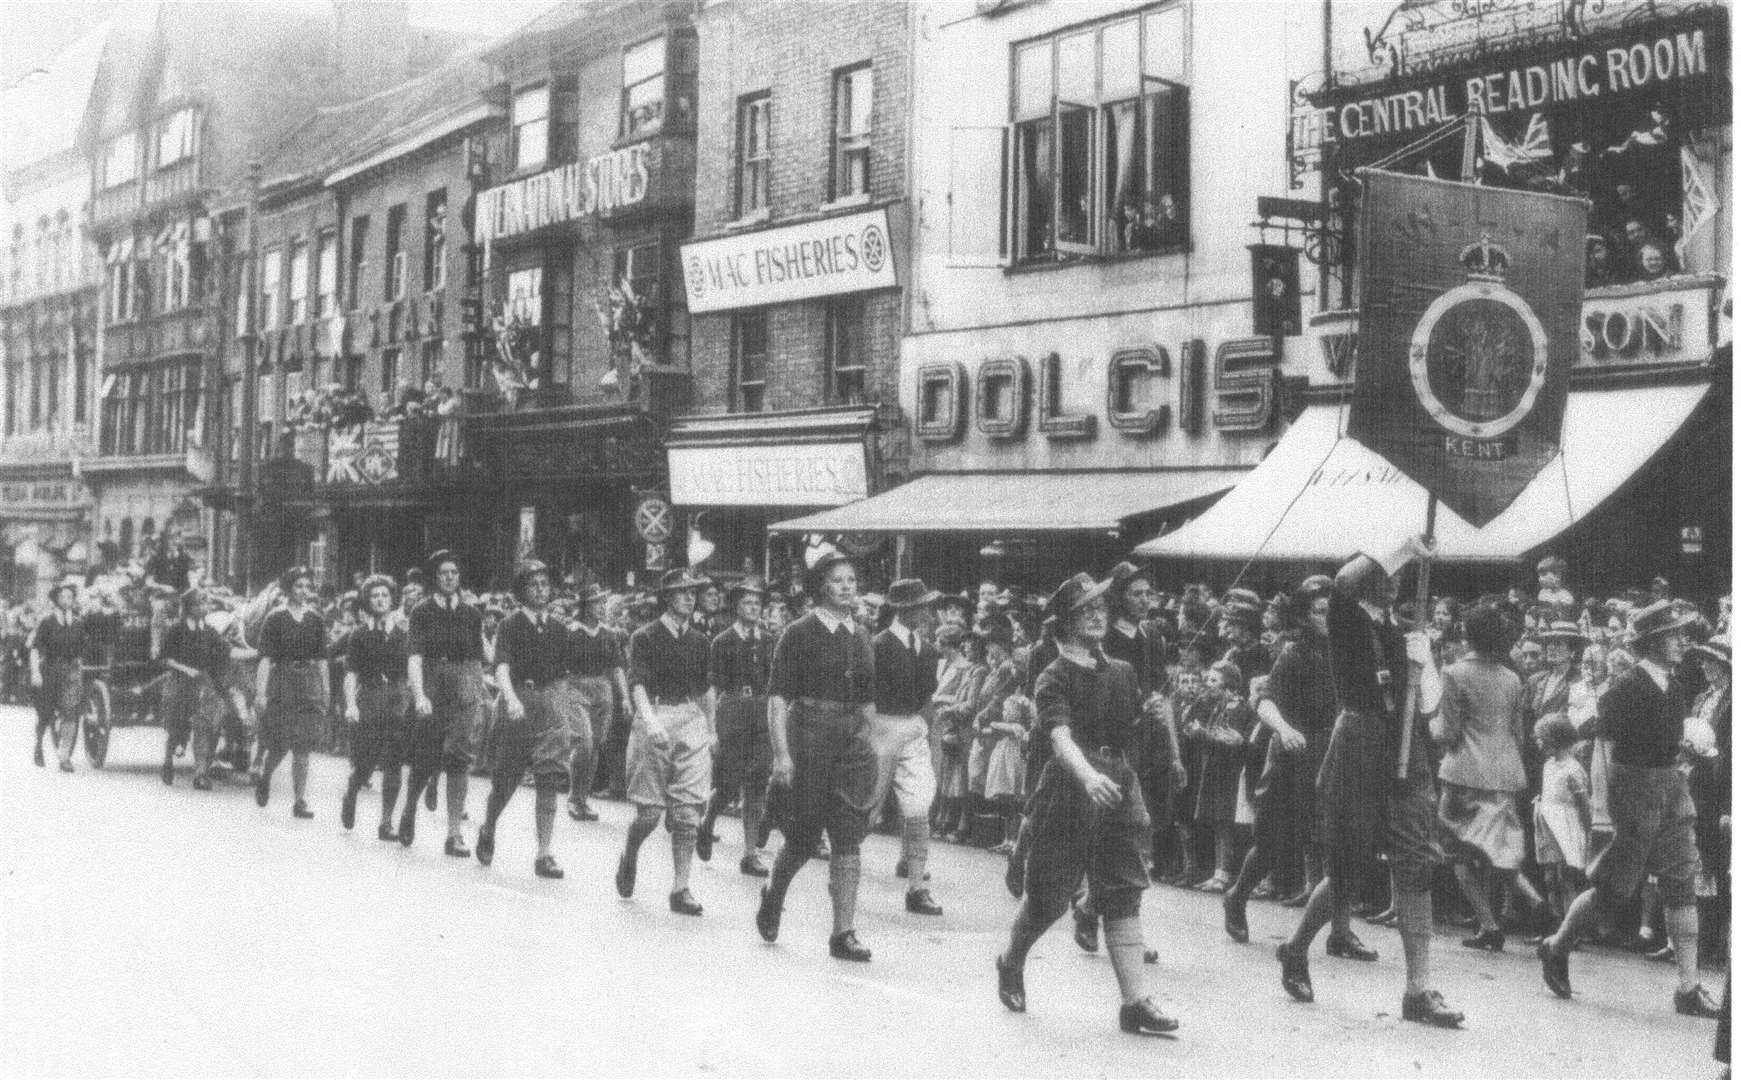 Members of the Women’s Land Army on a Victory Parade through Maidstone in 1945